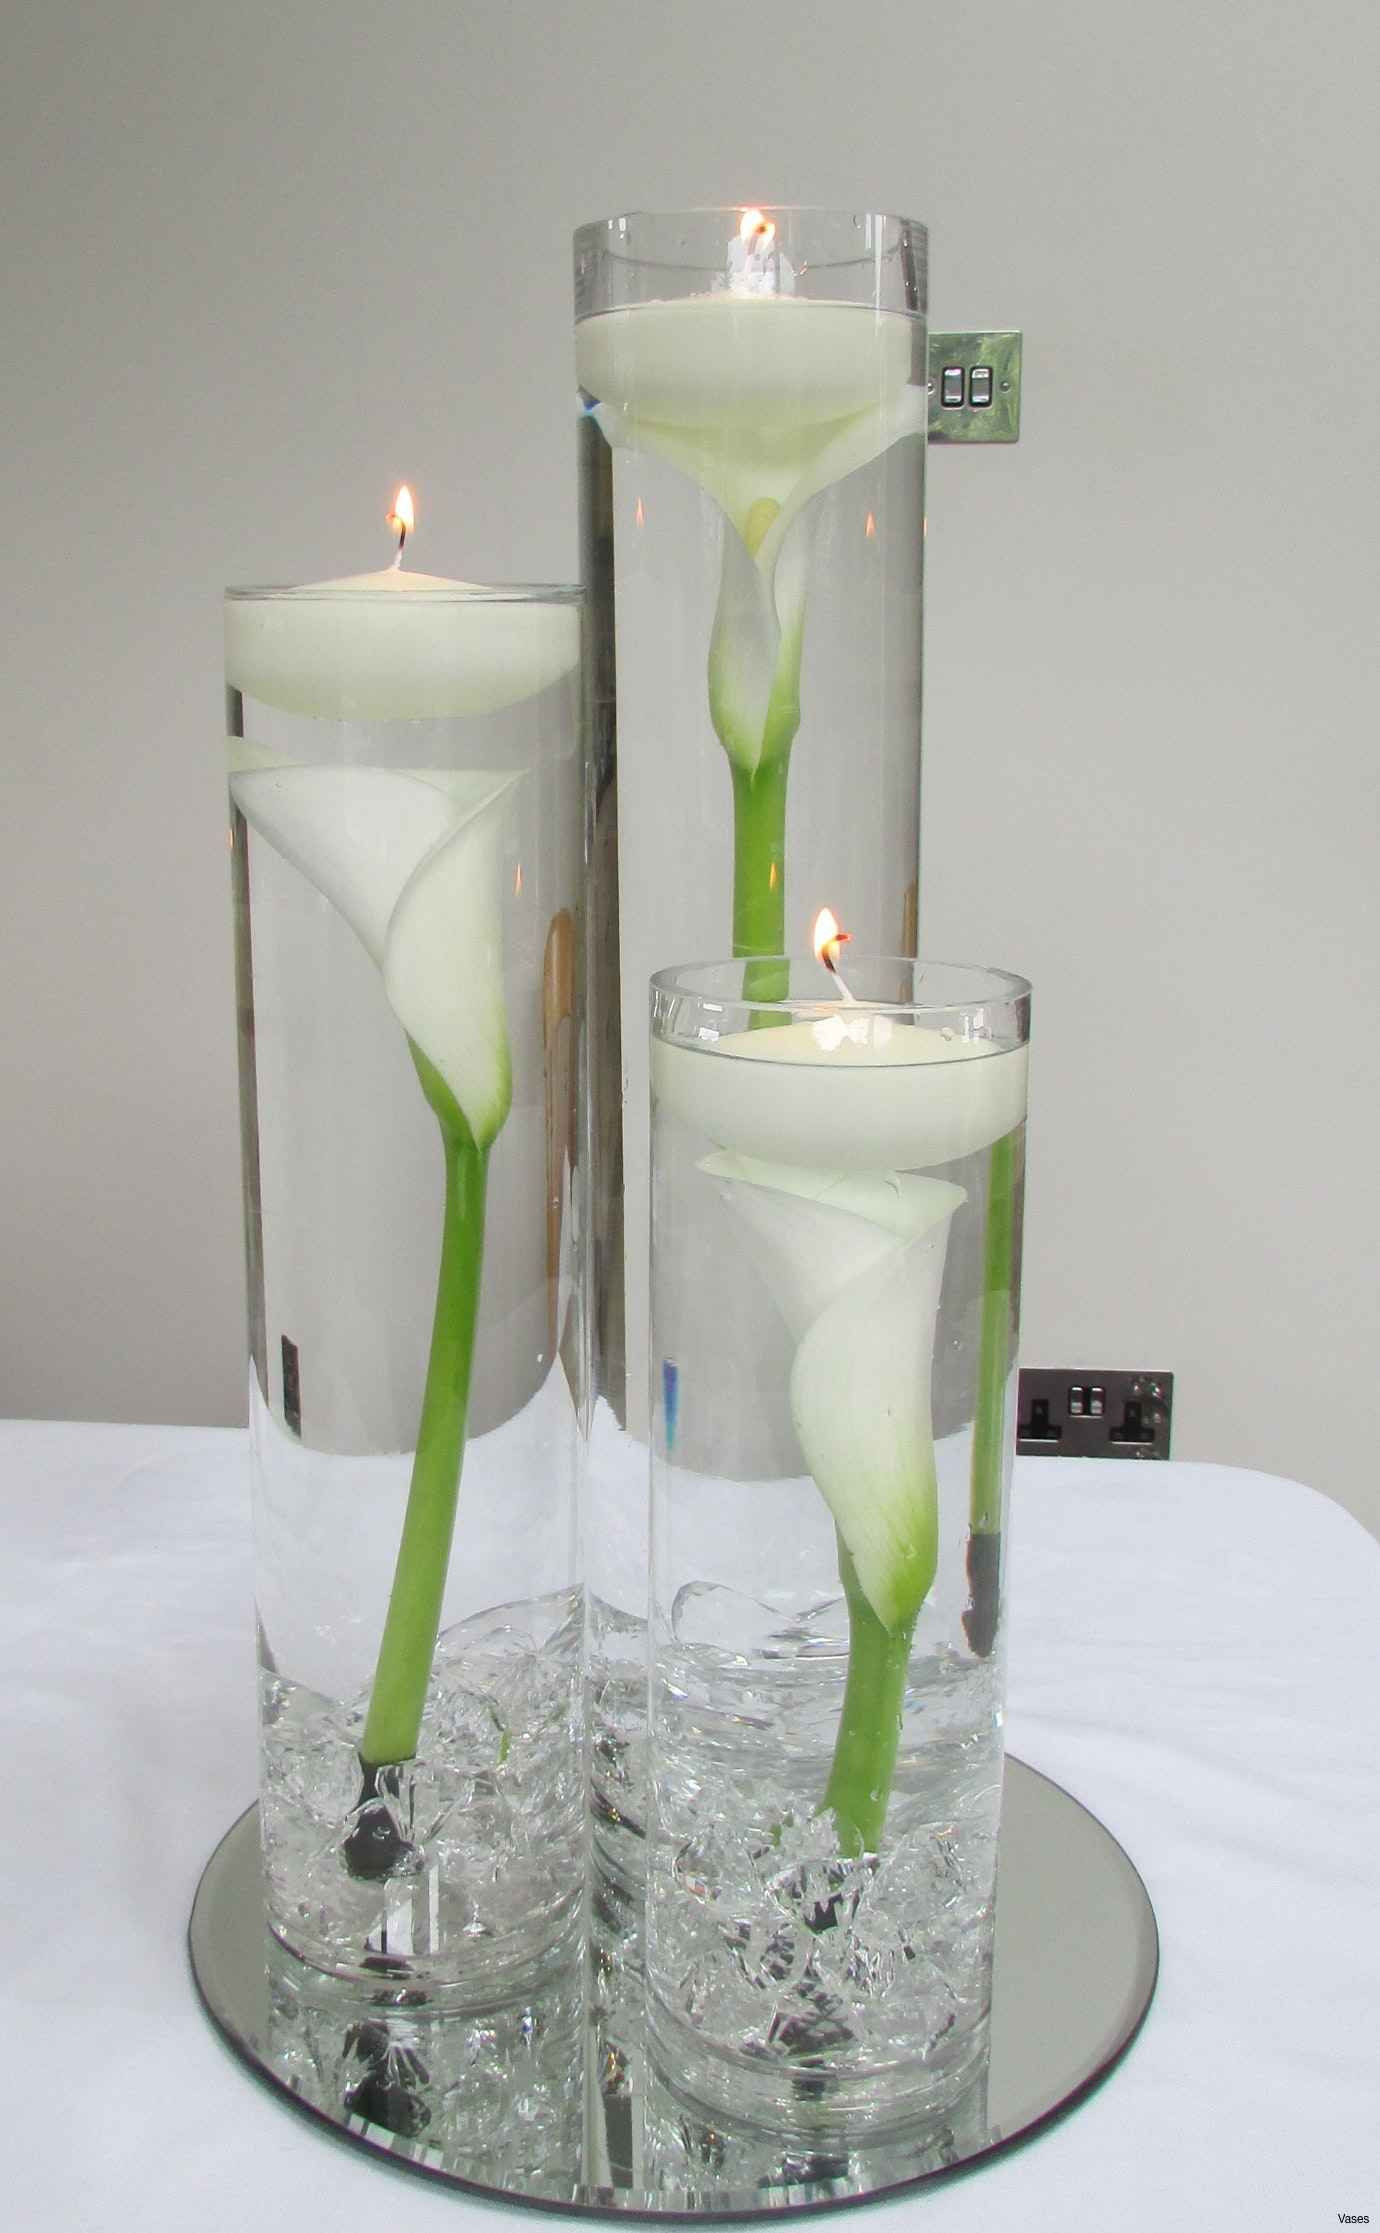 12 inch glass vases wholesale of 34 gold mercury glass vases the weekly world with regard to vases floating candle vase set glass holdersi 0d centerpieces dollar